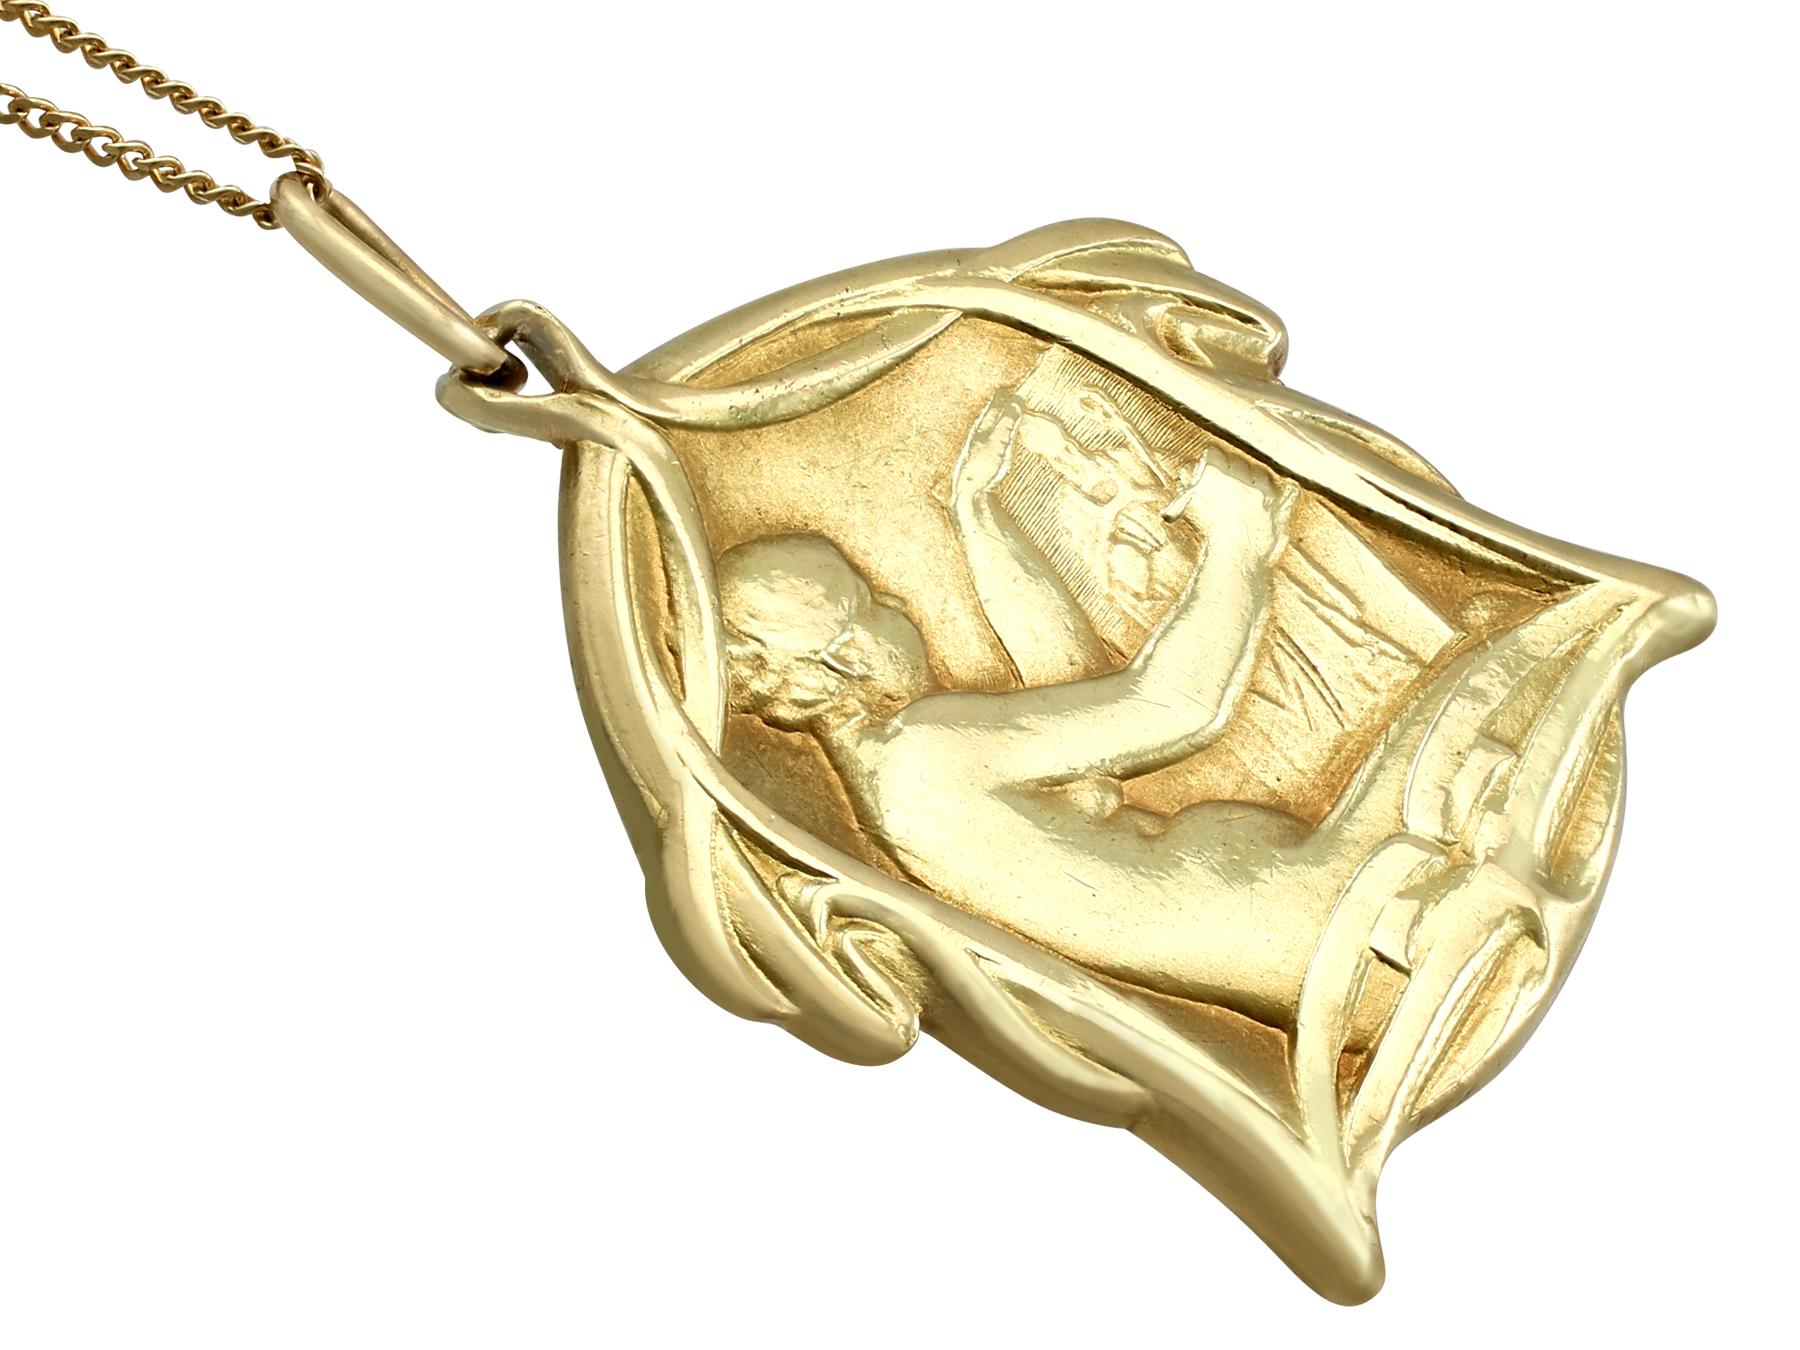 1910s Yellow Gold Art Nouveau Pendant by Fernan Du Bois In Excellent Condition For Sale In Jesmond, Newcastle Upon Tyne